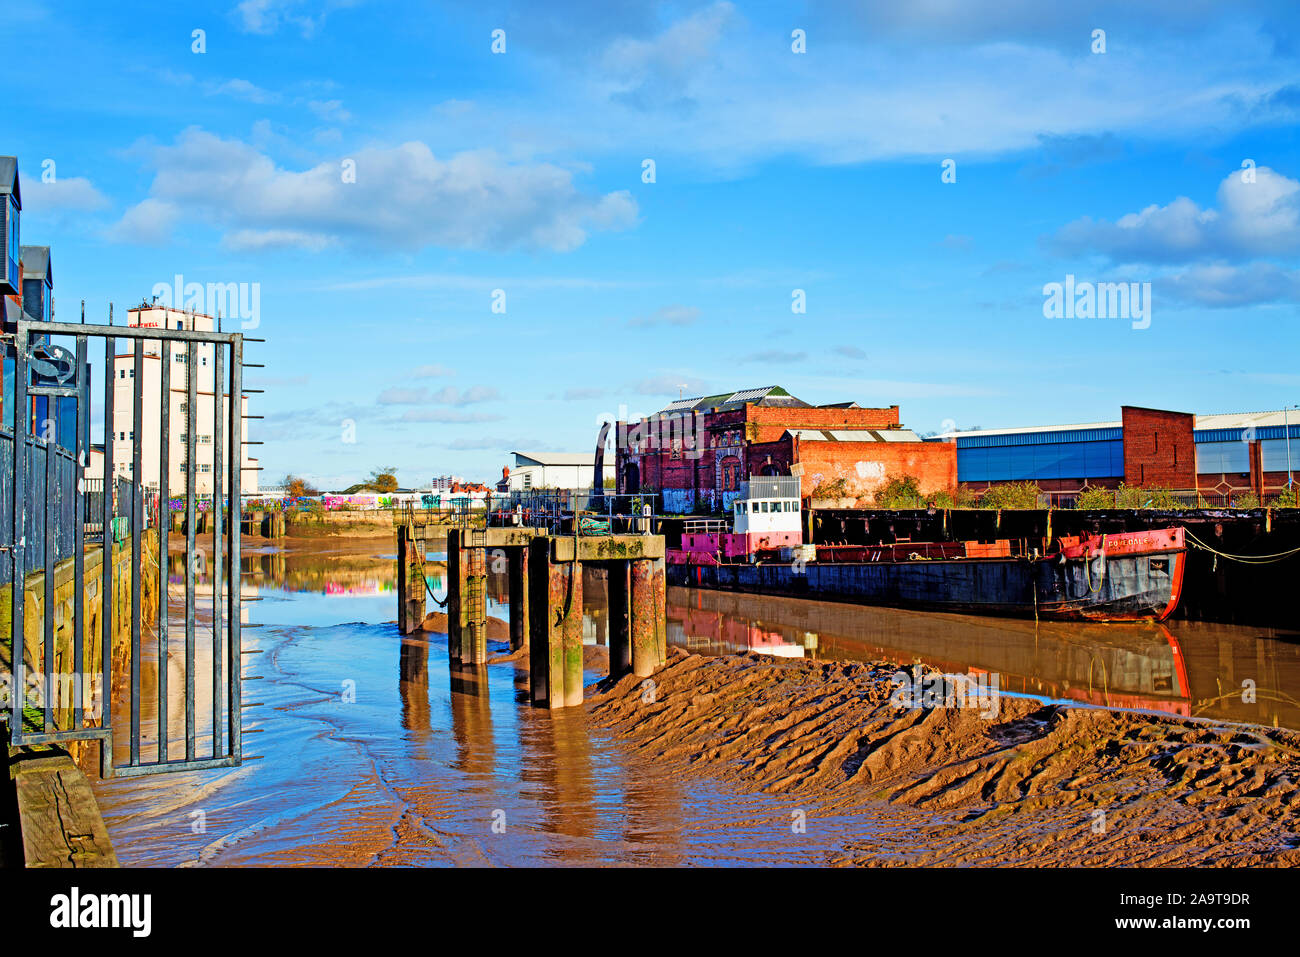 Fiume Hull, East Riding nello Yorkshire, Hull, Inghilterra Foto Stock